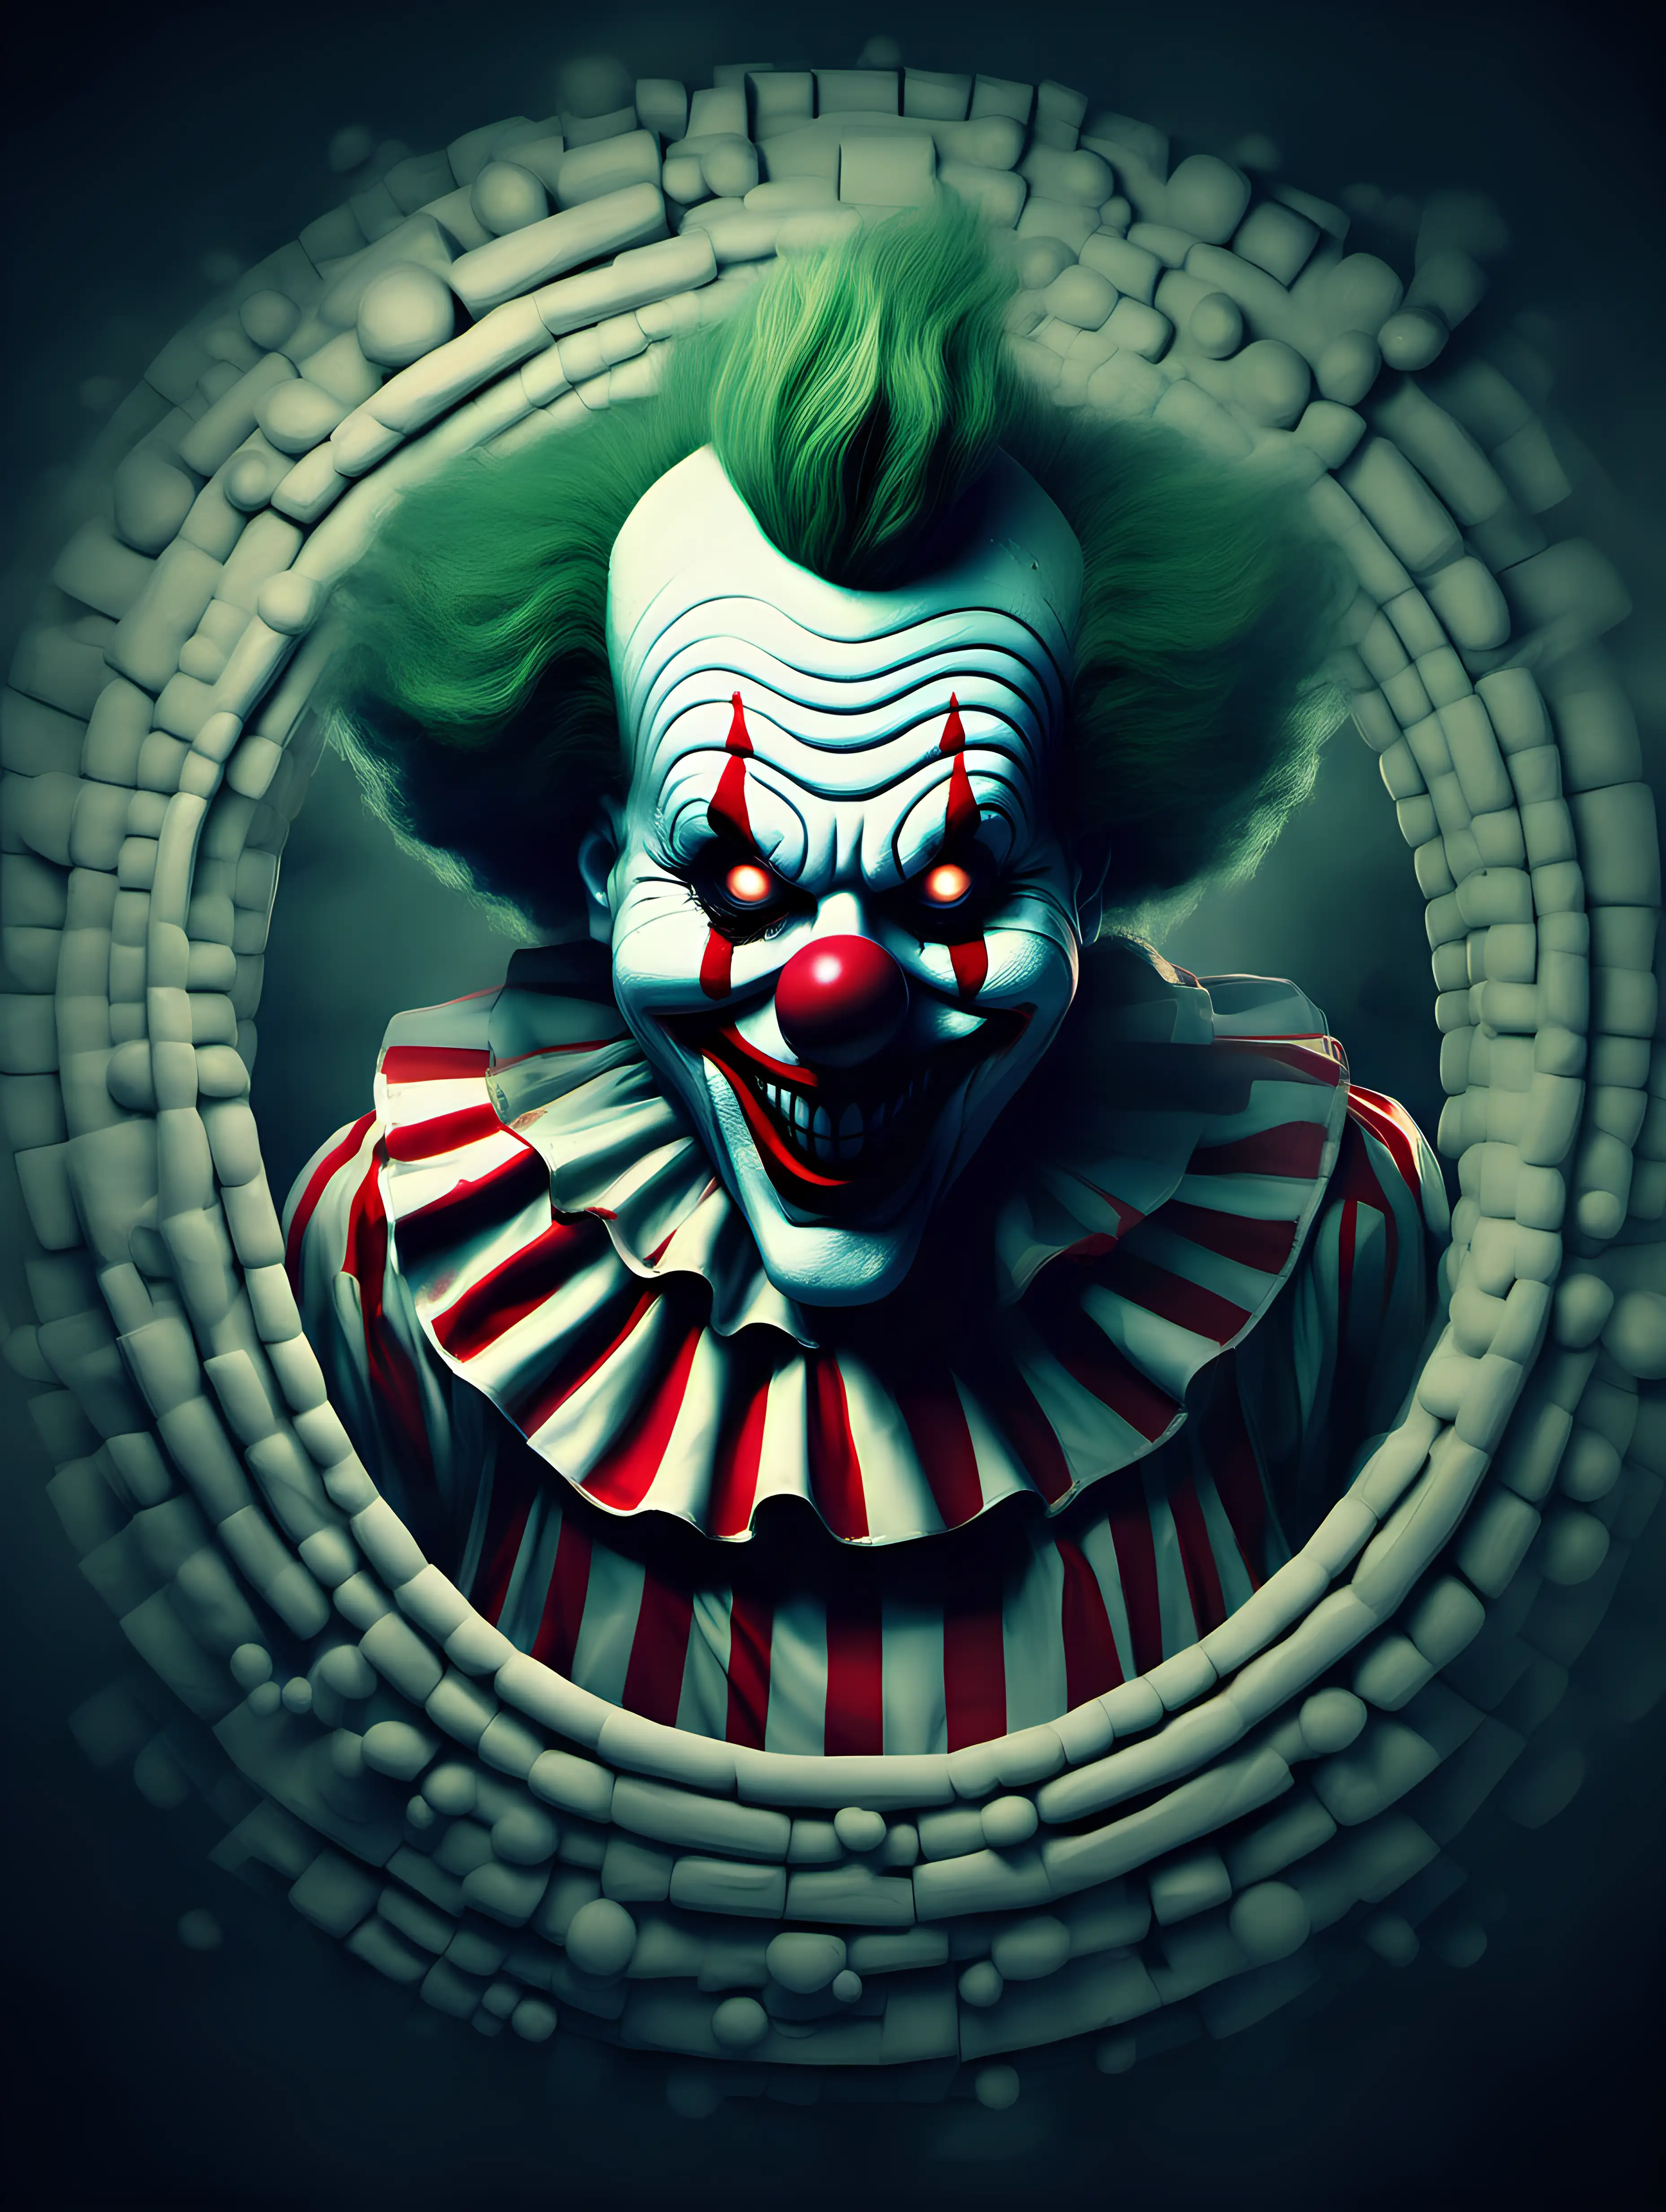 3D Hypnotic Illusion of a Scary Horror Clown